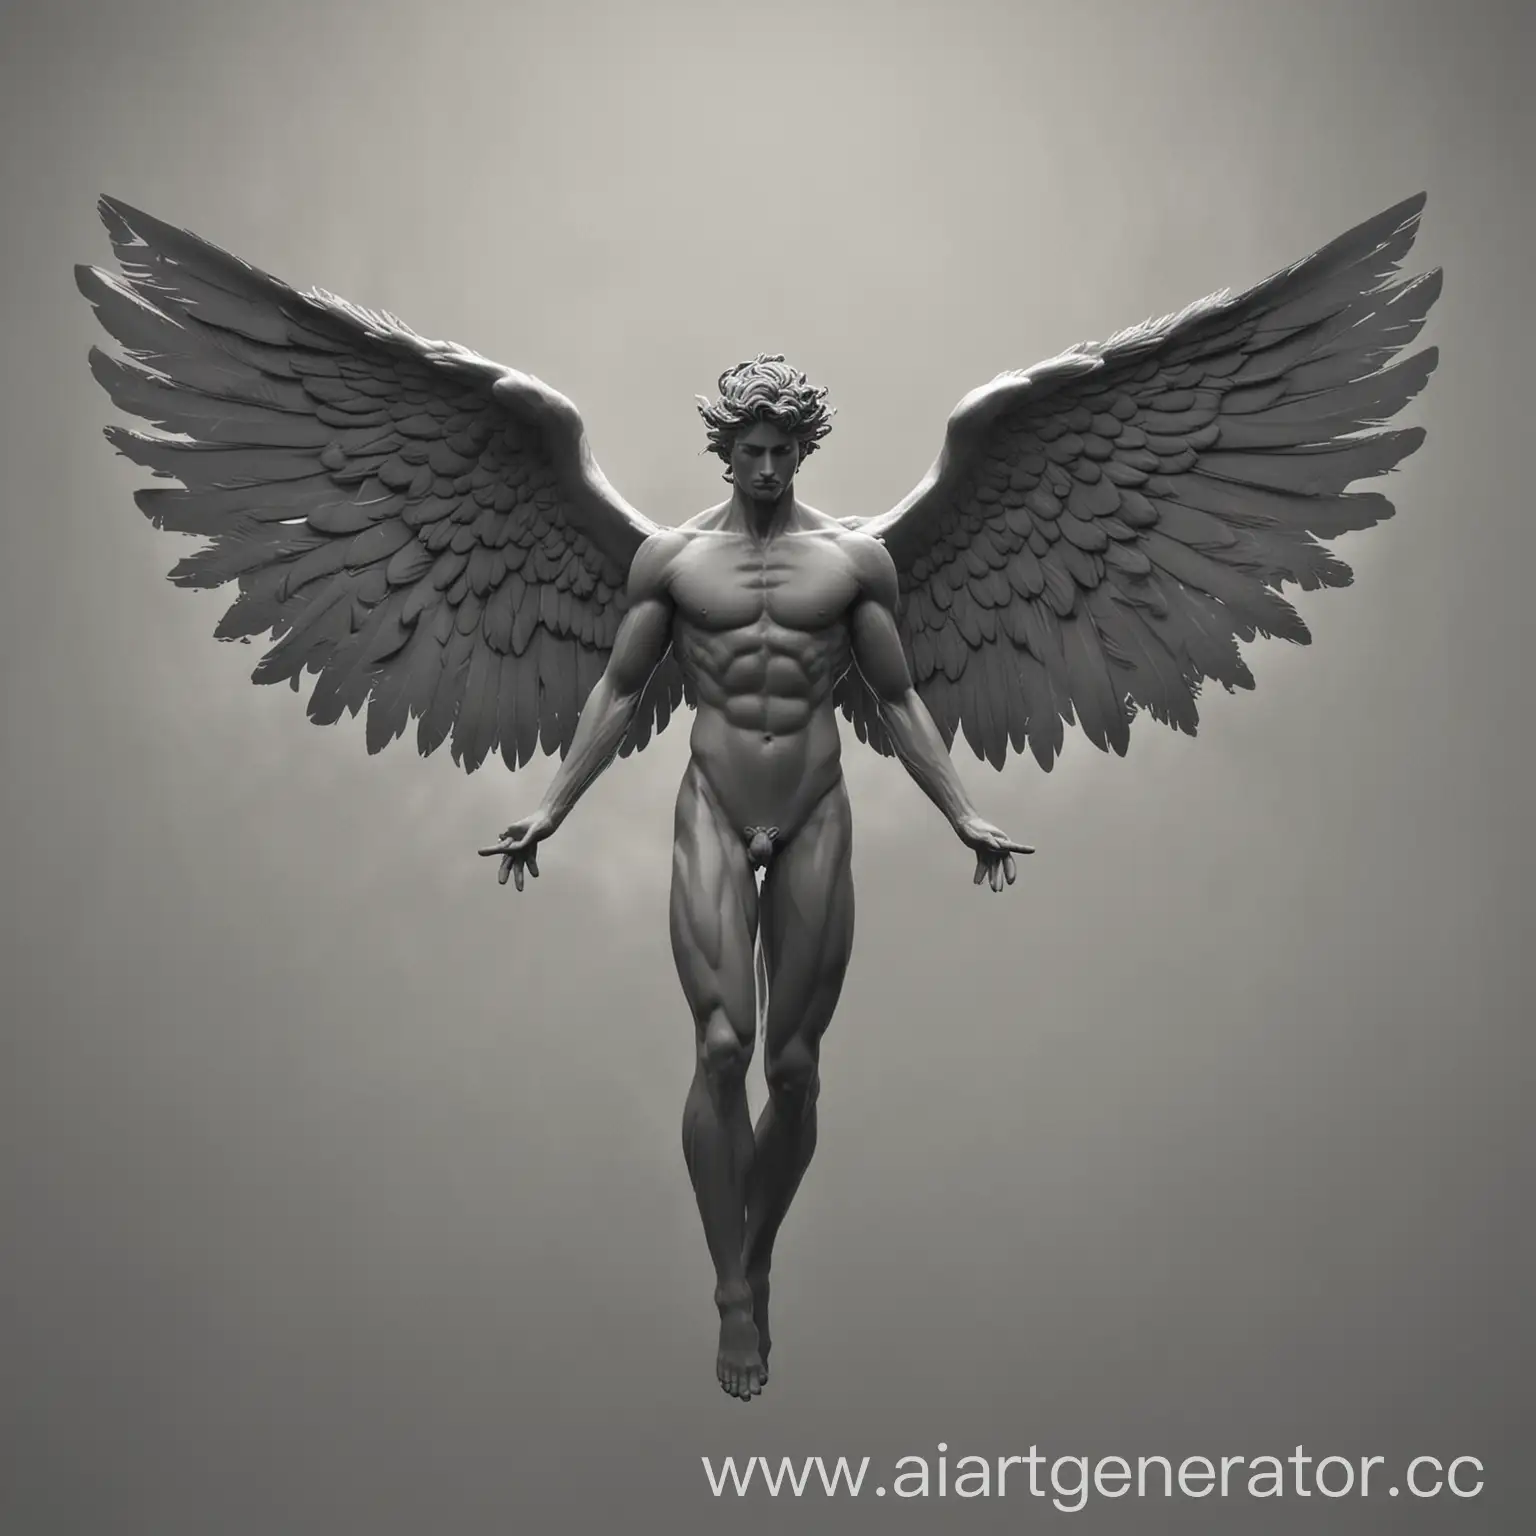 Silhouette-of-Athletic-Zephyr-God-with-Wings-in-Grey-Windy-Scene